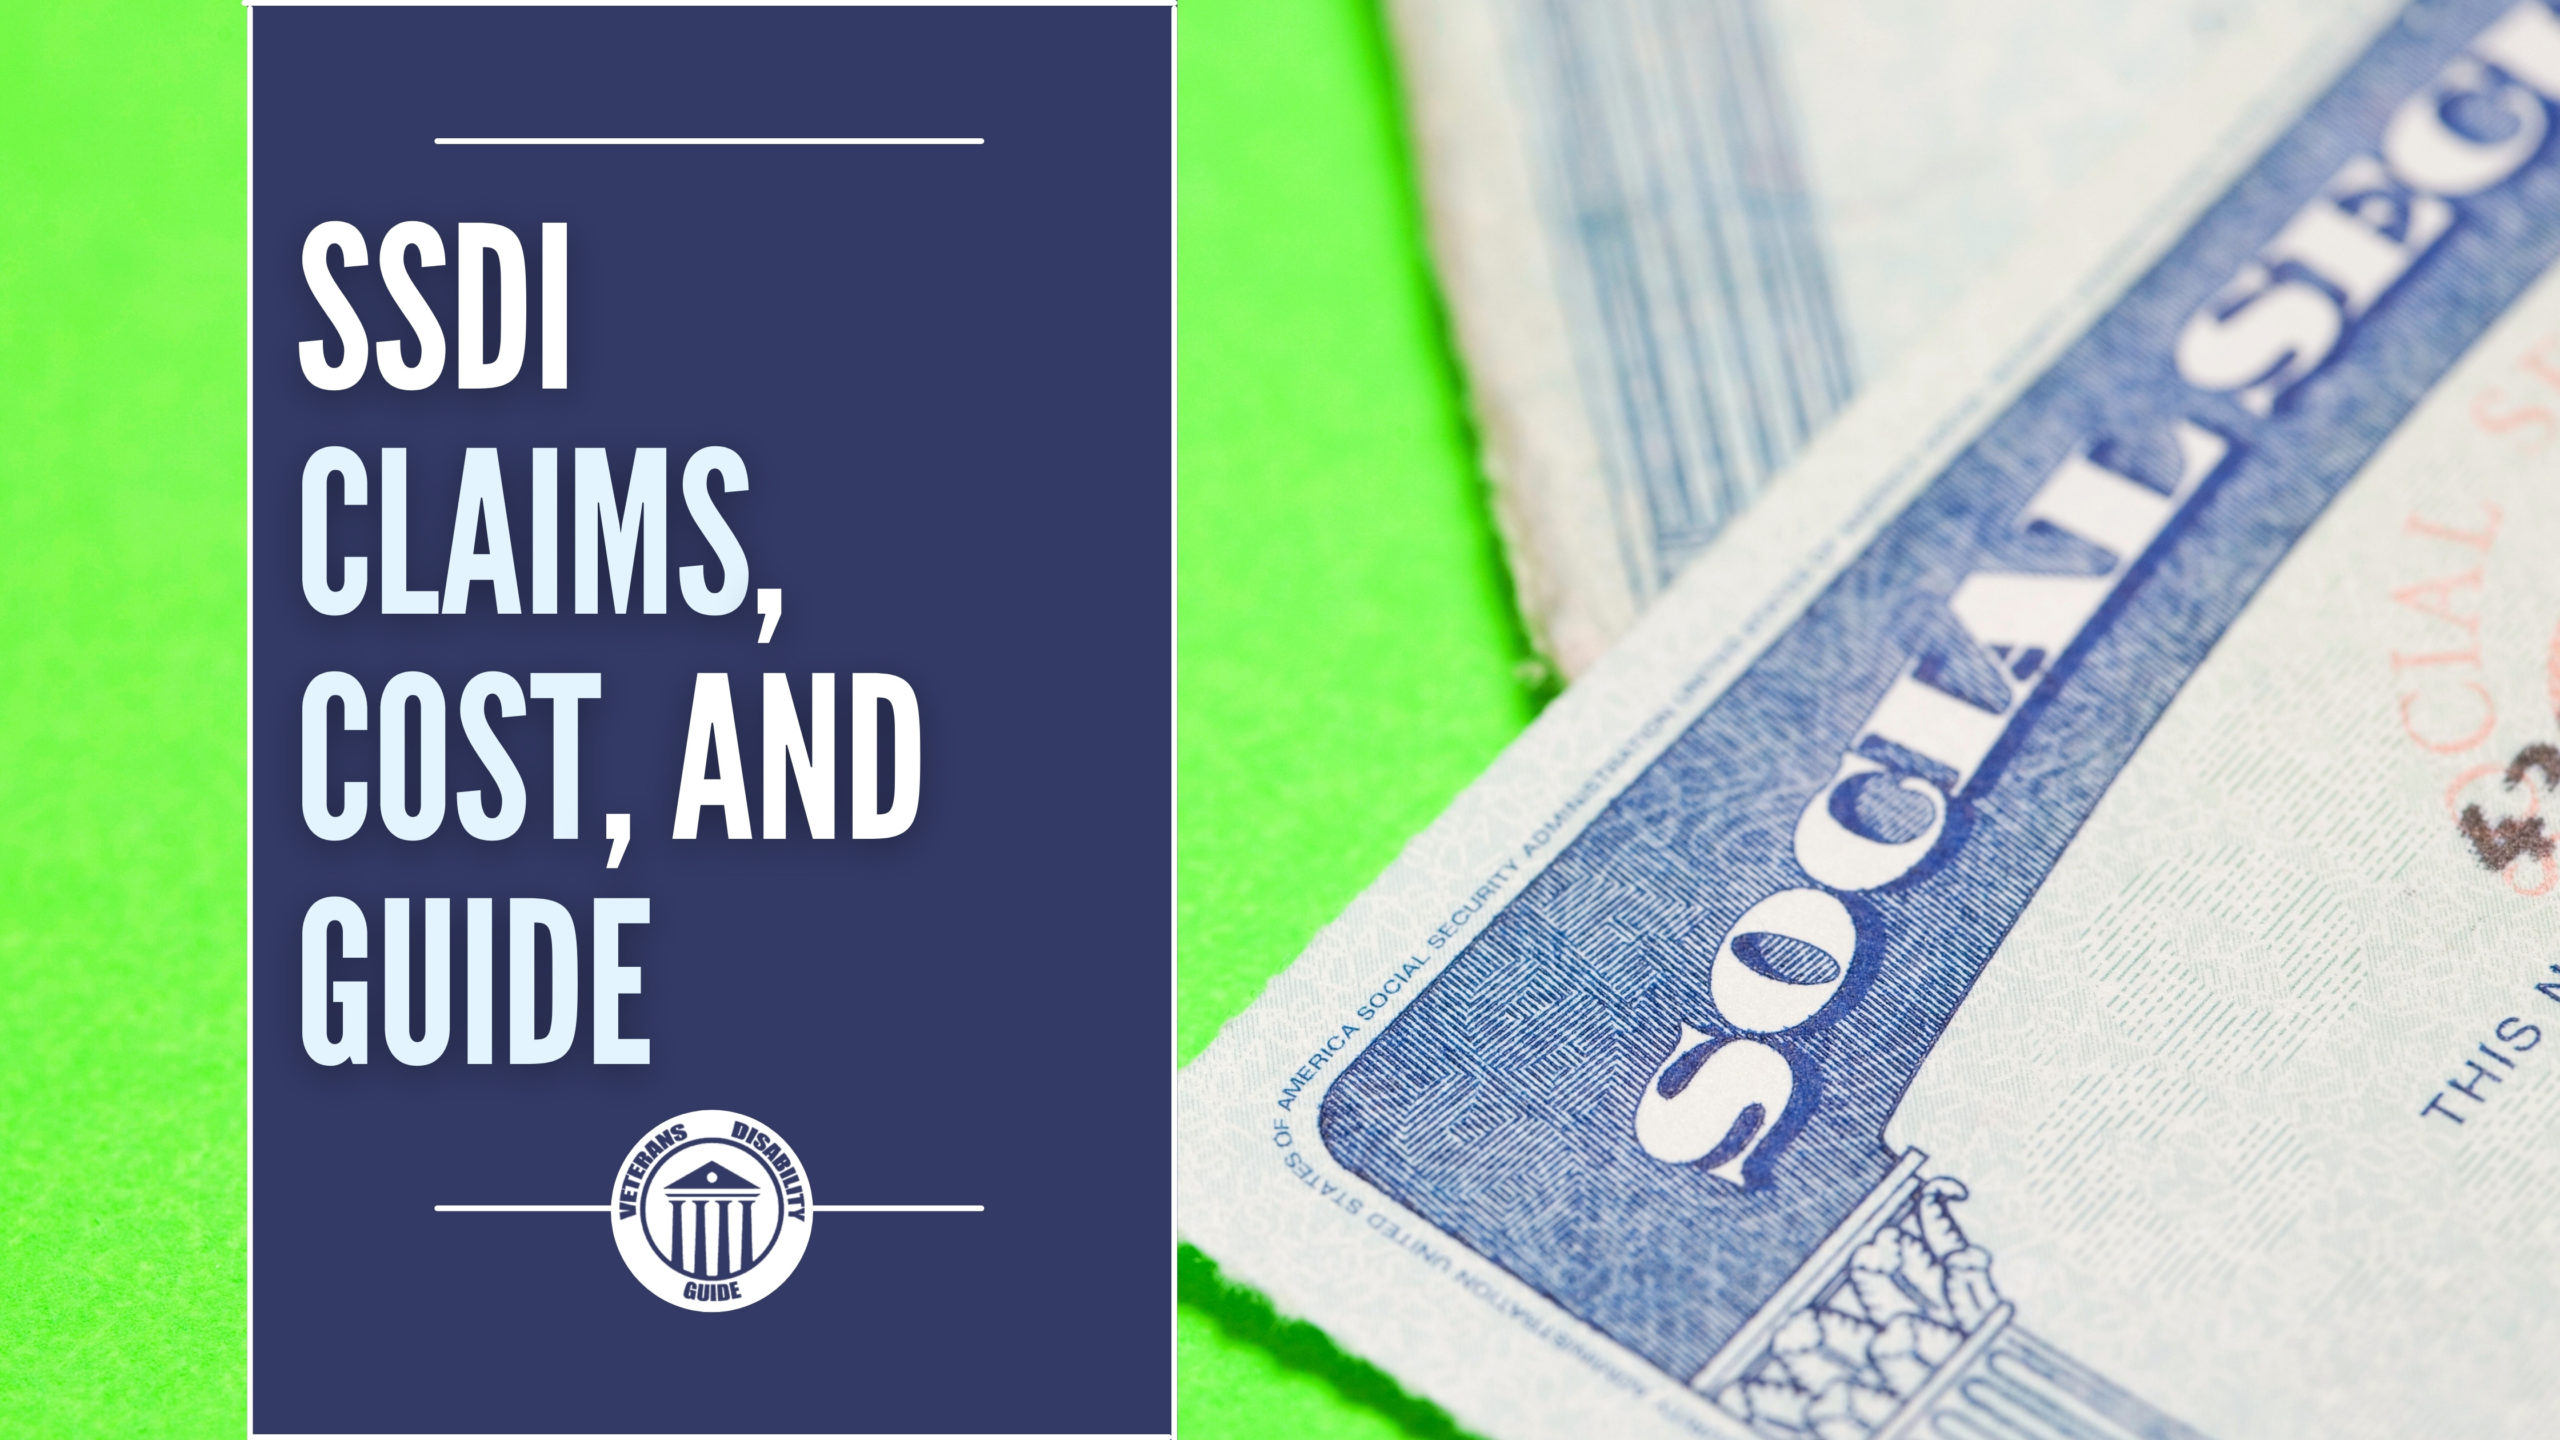 SSDI Claims, Cost, And Guide blog header